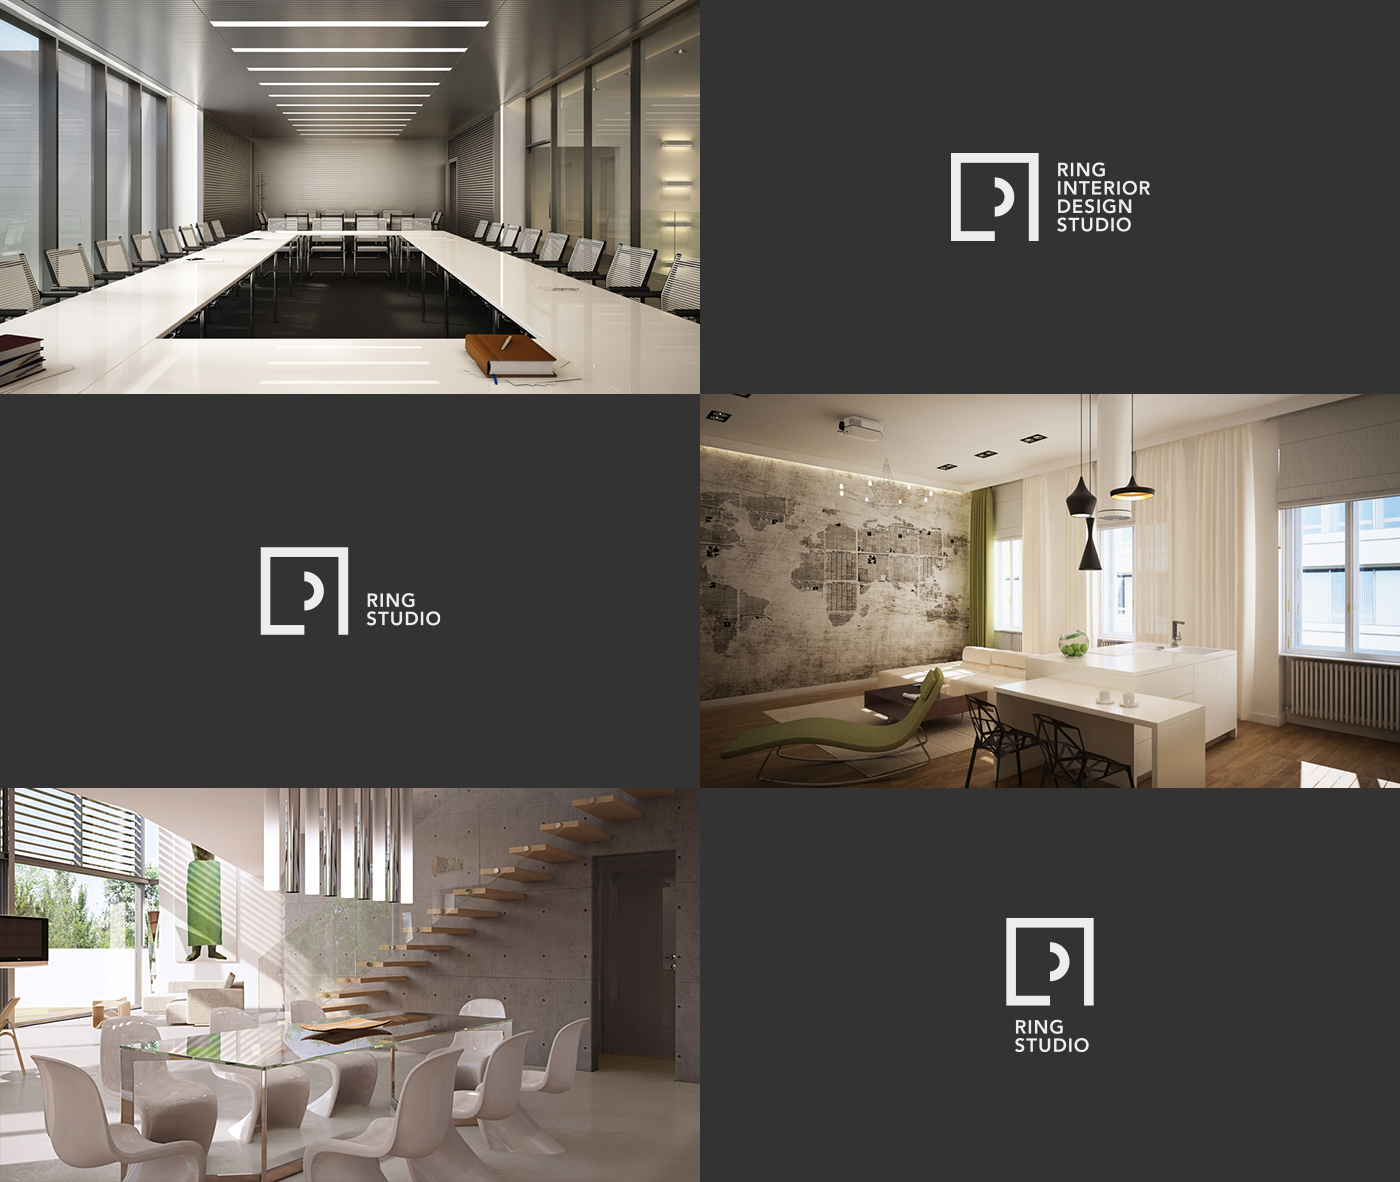 Ring Interior logo variations and interior photos of residential and office buildings